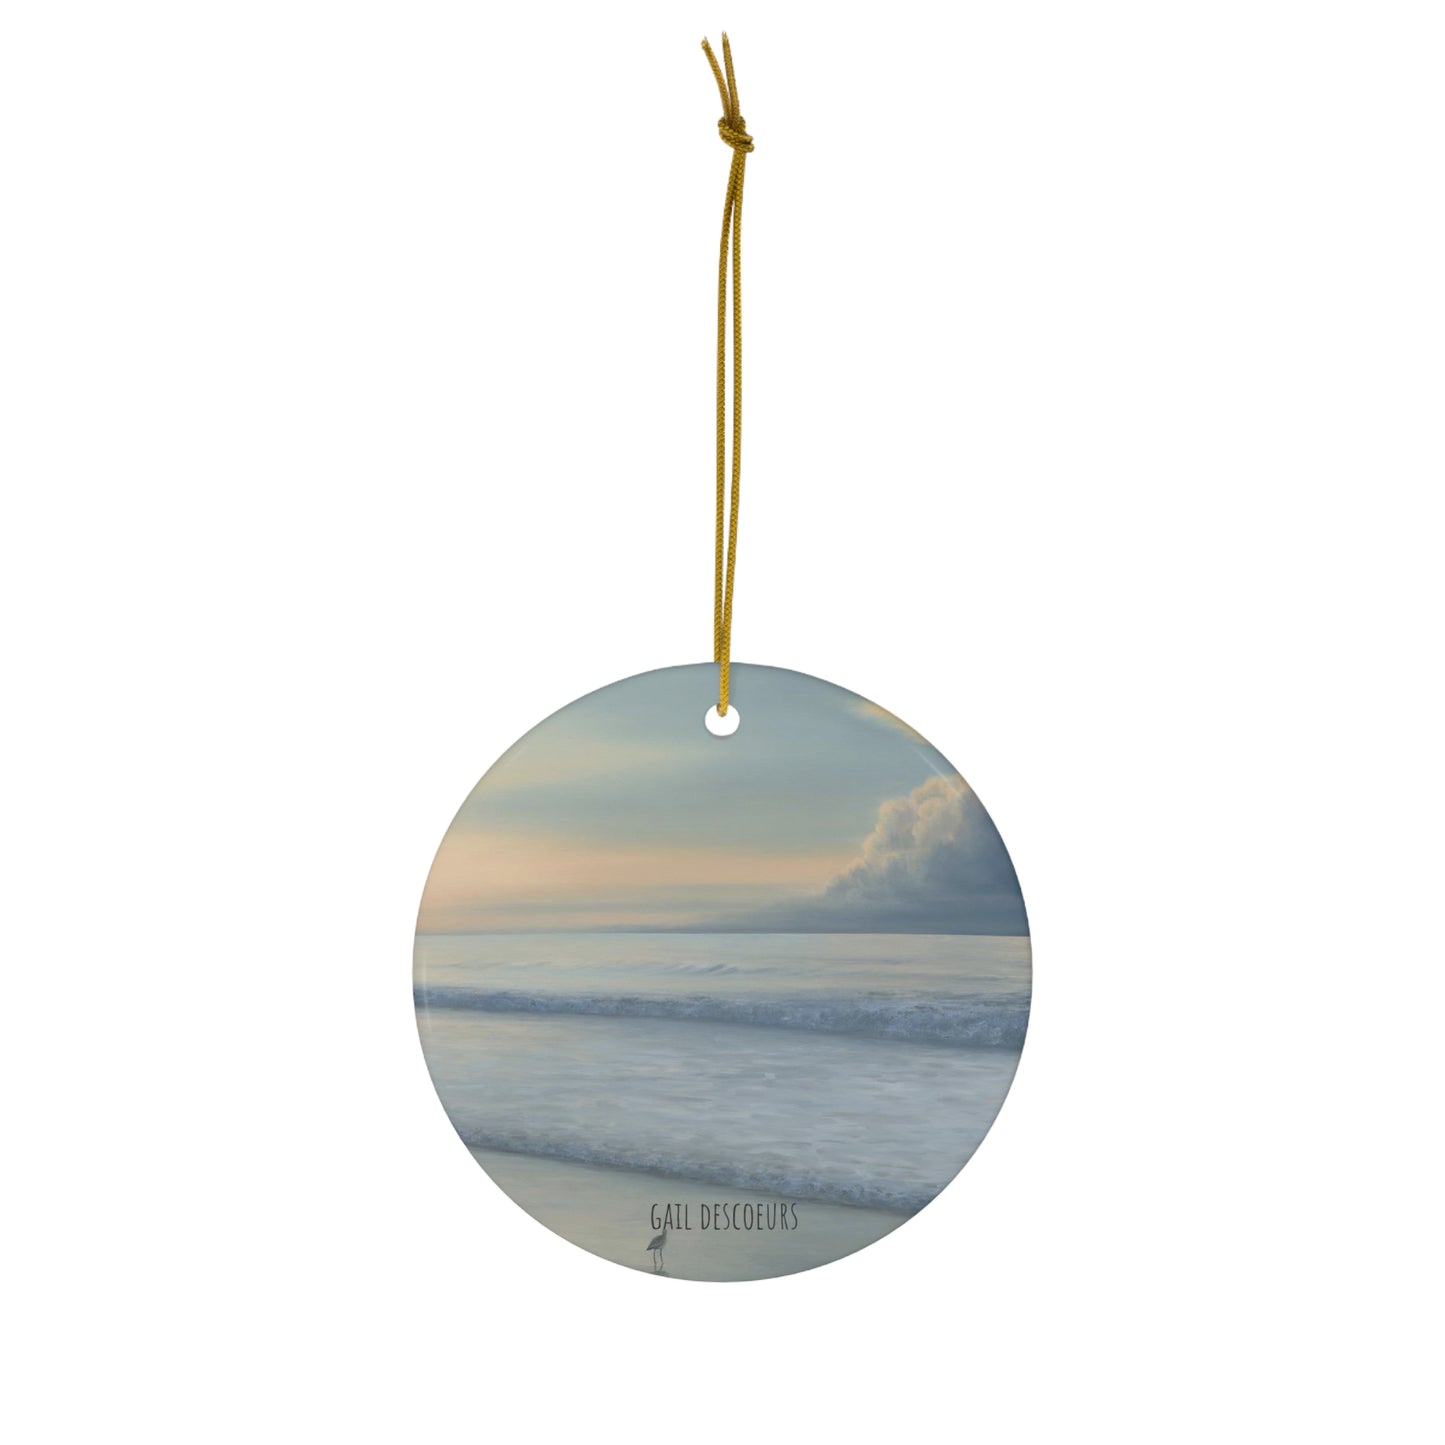 Holiday Ornament - Gail Descoeur's The Sea and the Sandpiper